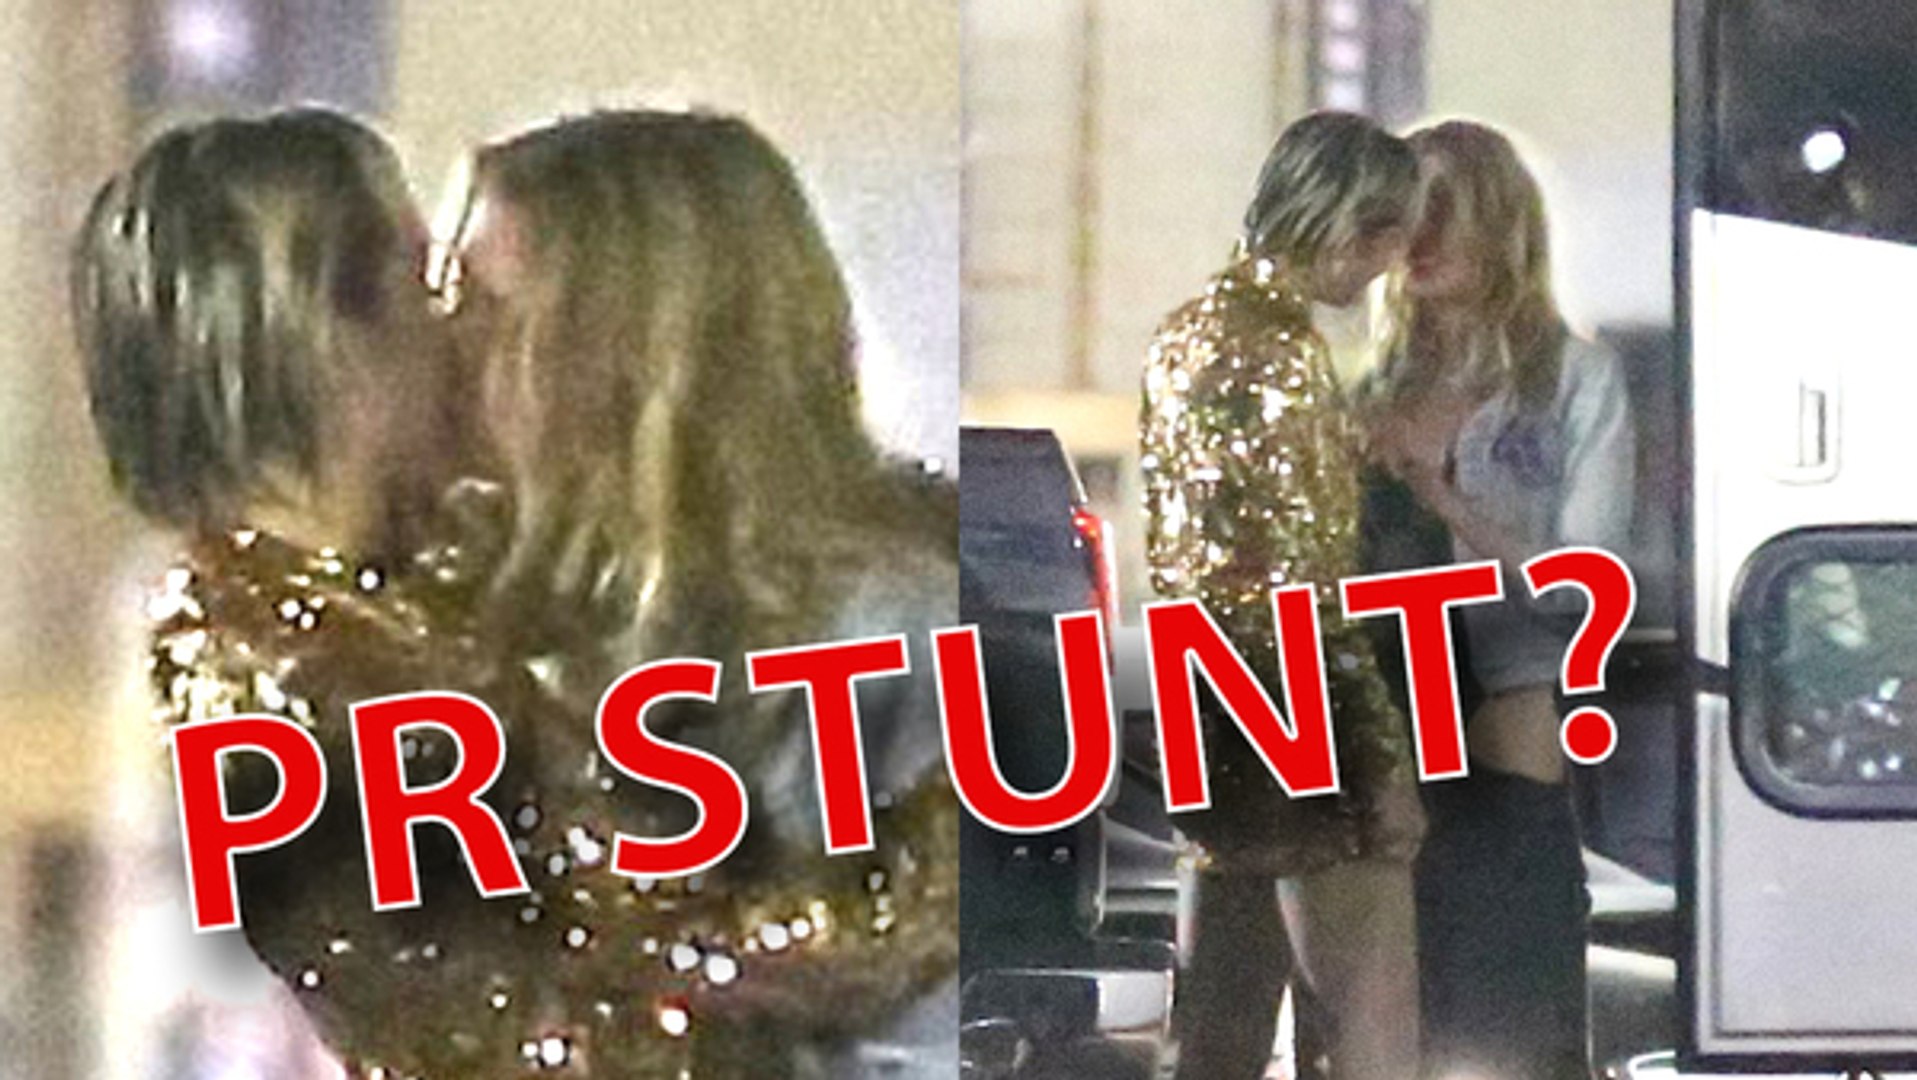 Miley Cyrus' New Girl/Girl Relationship: PR Stunt? or Real Love?